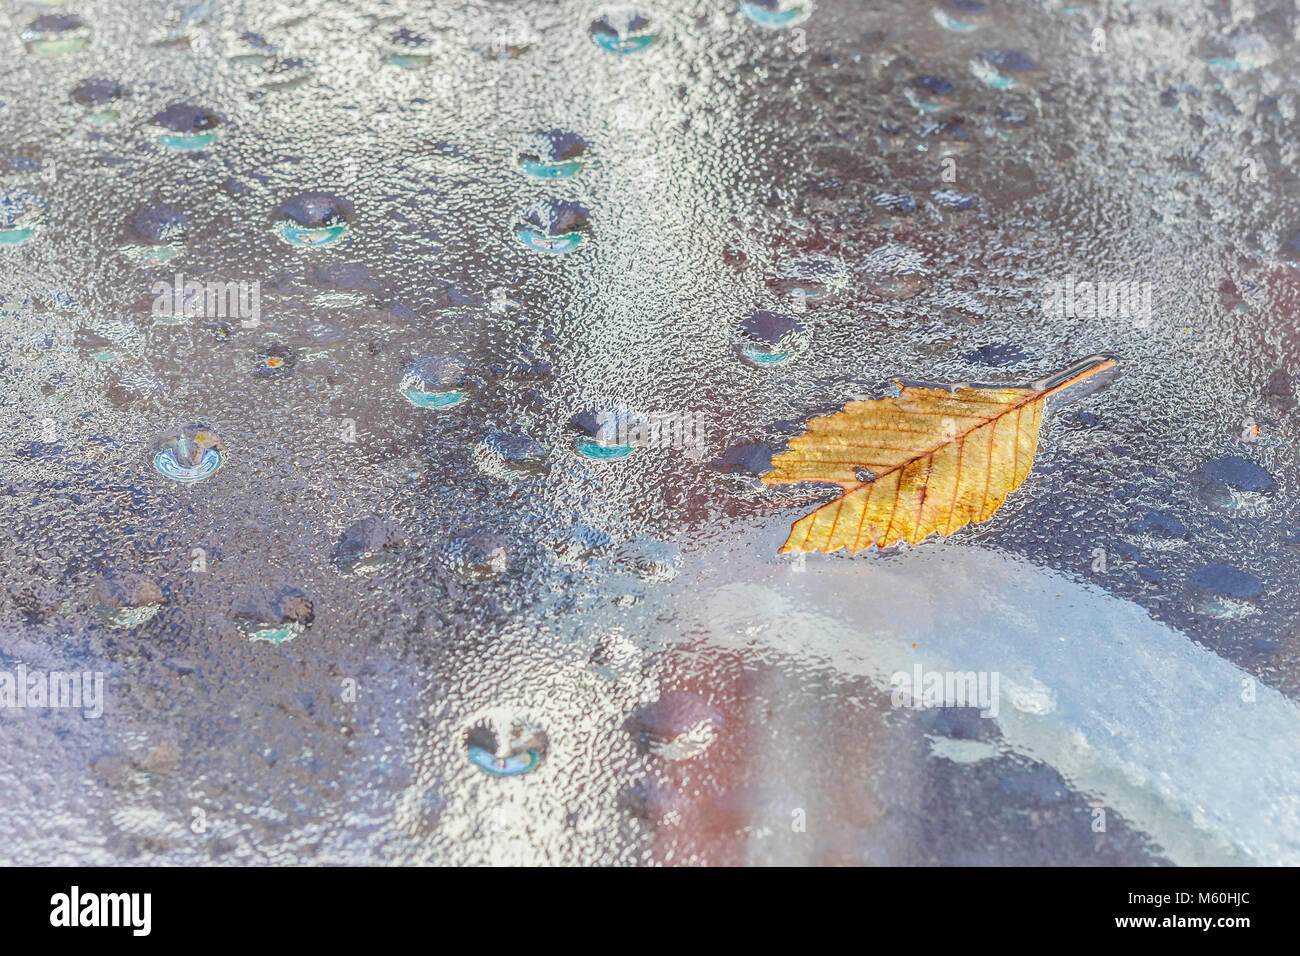 A high-key abstract of a yellow leaf on a translucent glass table top, amid water drops and condensation, with the table's legs just visible below. Stock Photo